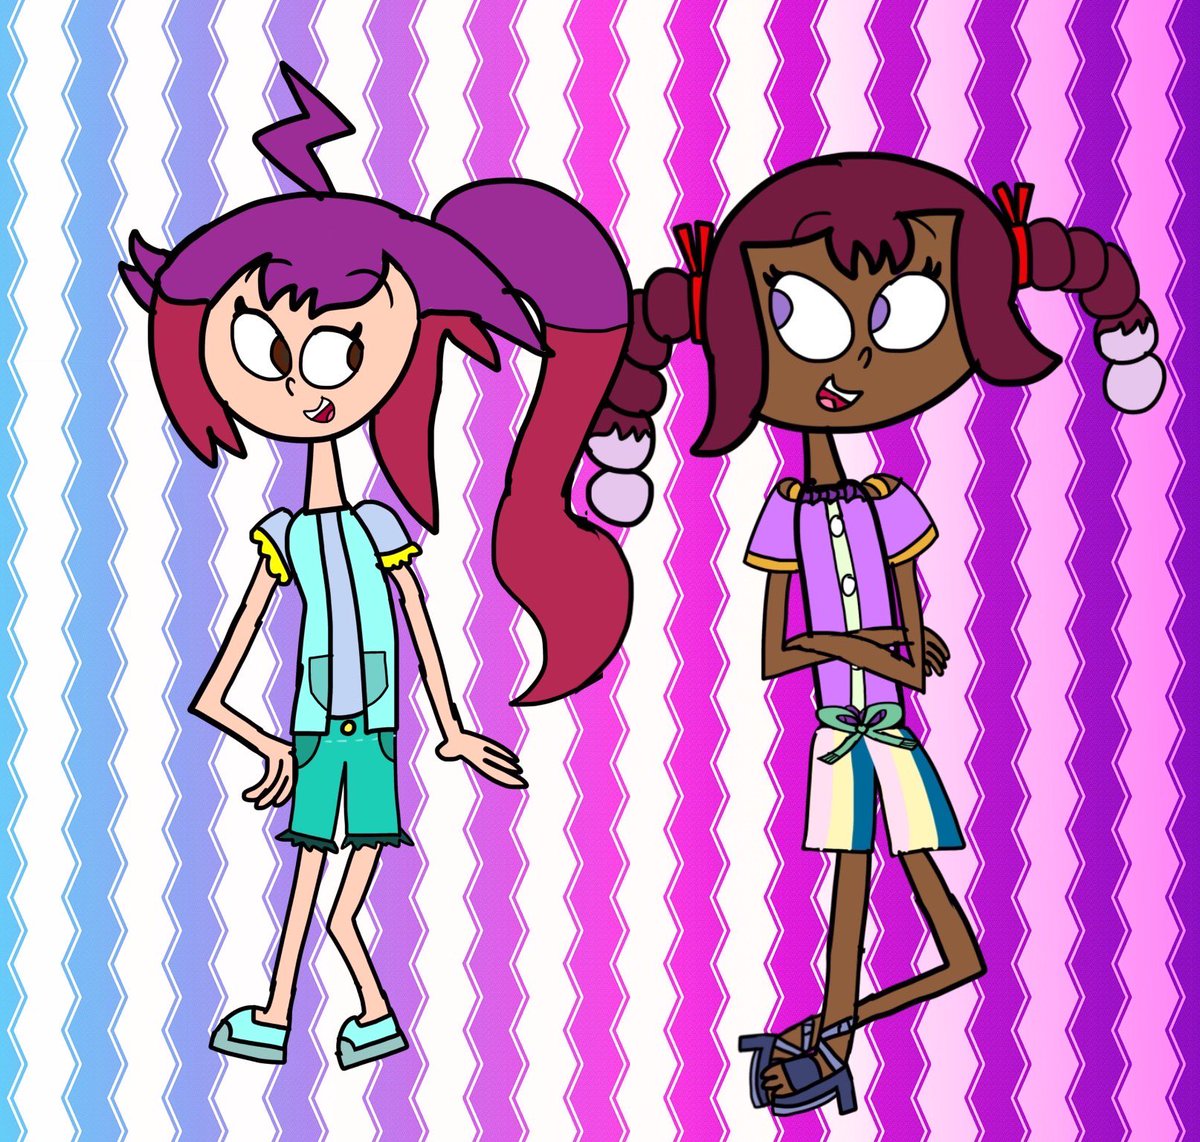 Shelcy and Kiana got these new outfits for Summer 2024 and for a new story that will be published in early May!

#art #artwork #digitalart #originalcharacterart #originalcharacters #summer #SUMMER2024 #summeroutfits #outfitdesigns